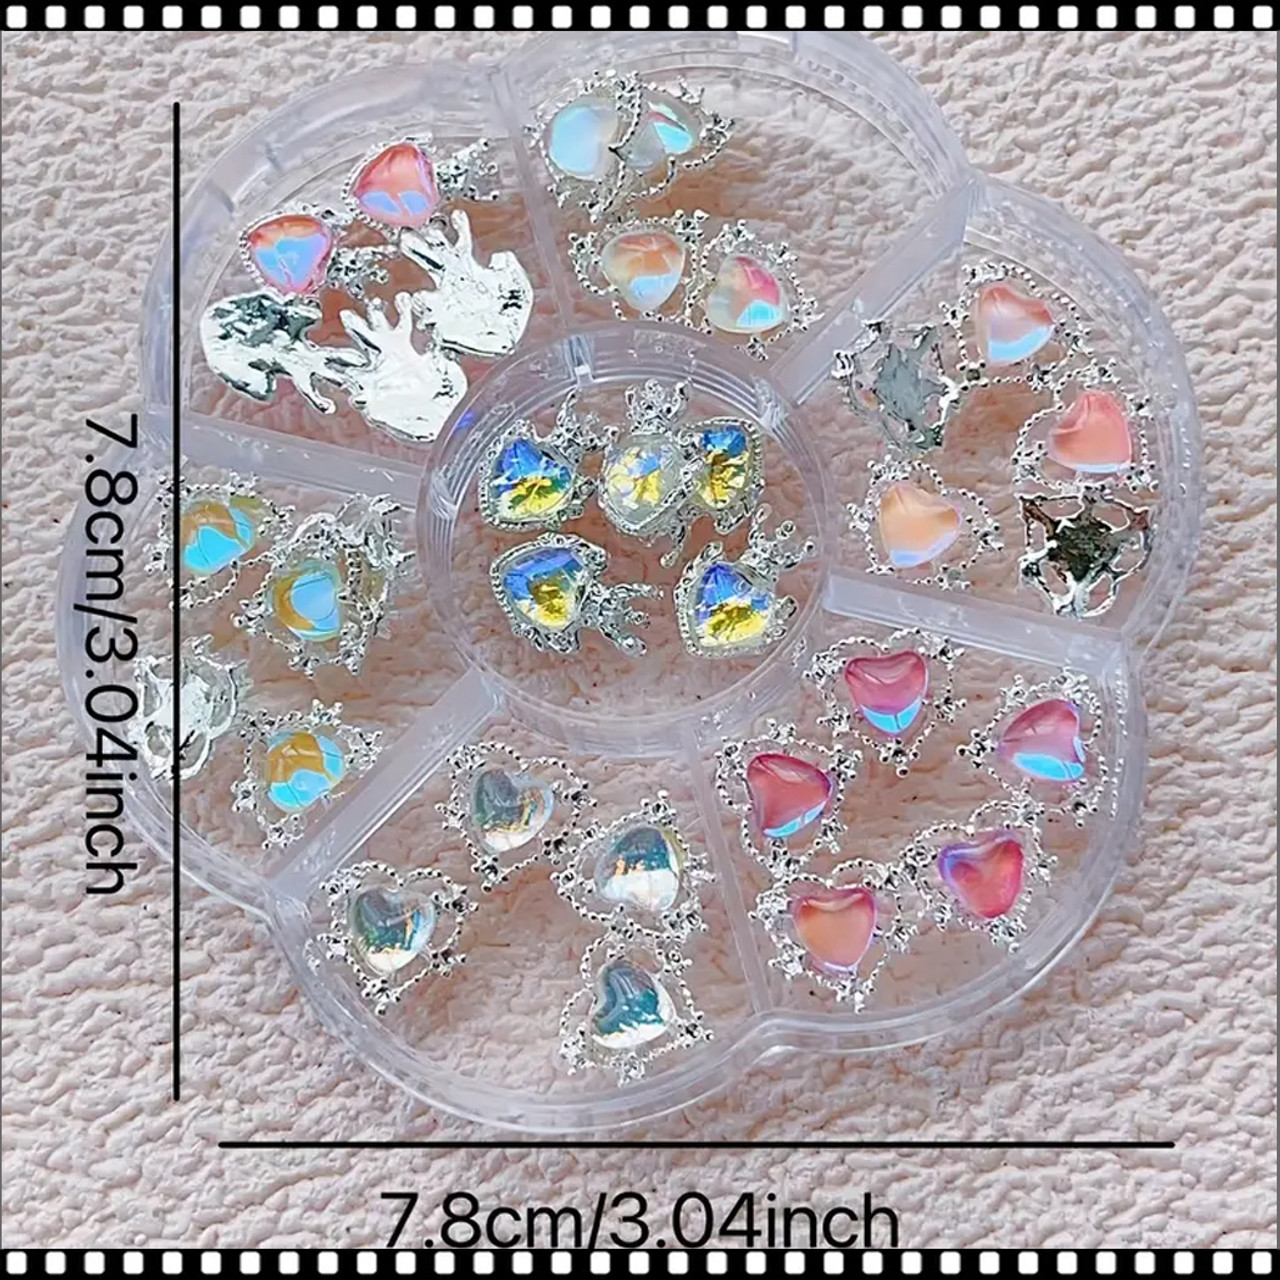  Anjulery 24 Pieces Rhinestone Heart Charms for Jewelry